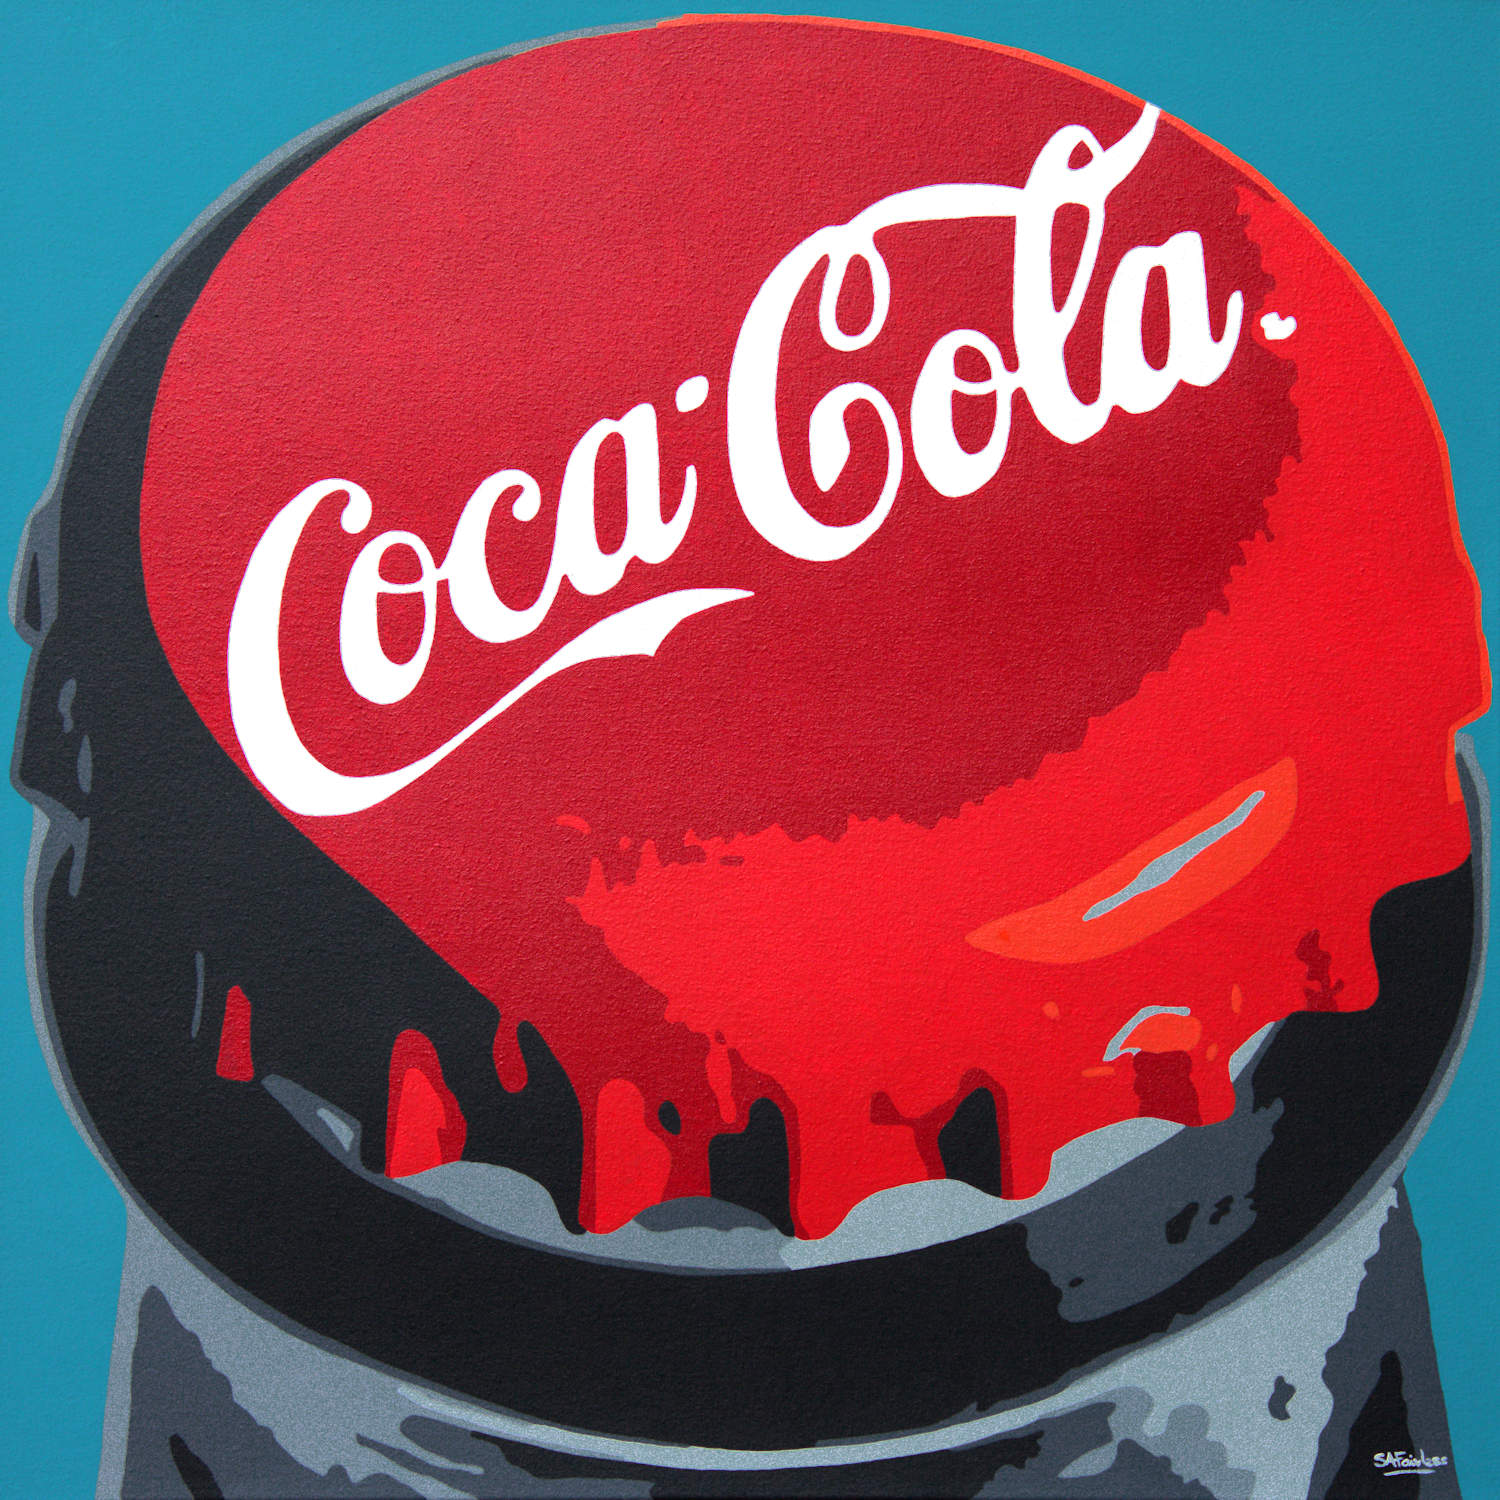 Coke popart painting on canvas